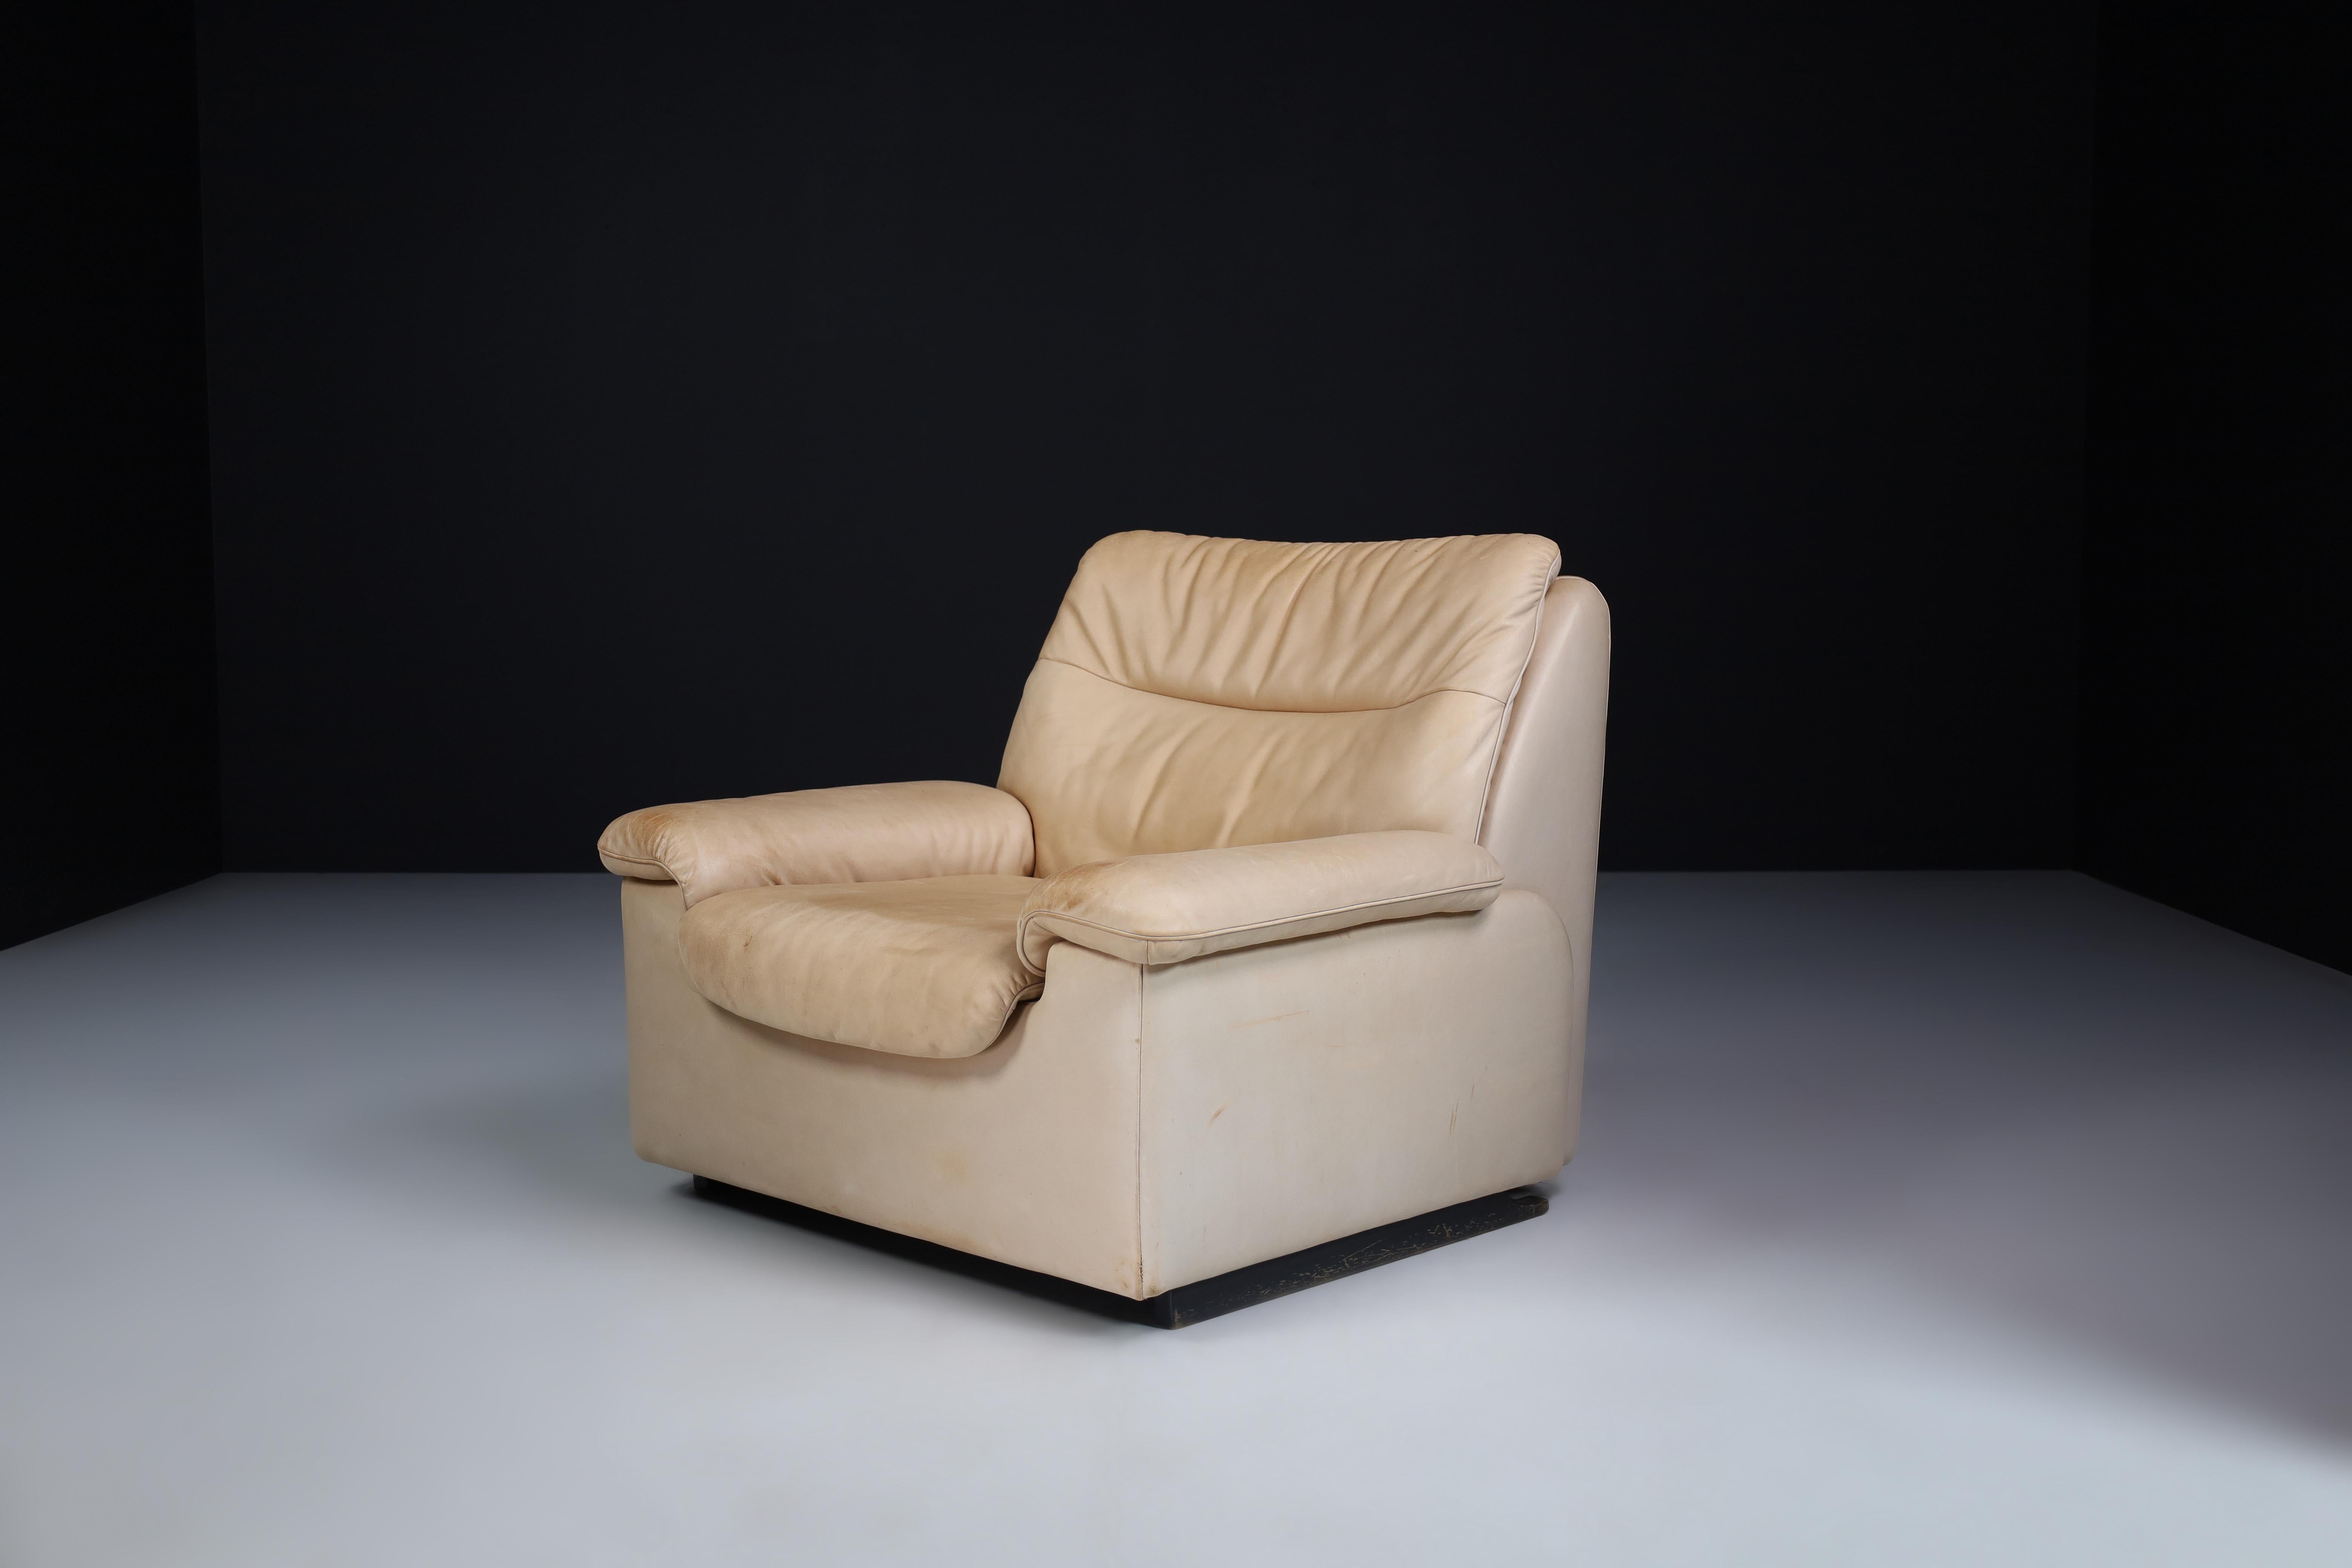 De Sede DS 63 lounge chair in leather, Switzerland 1970s

Robust DS-63 lounge chair. This De Sede lounge chair ensures ultimate comfort and building quality with its solid wooden frame and thick hand-stitched leather upholstery. Nice original